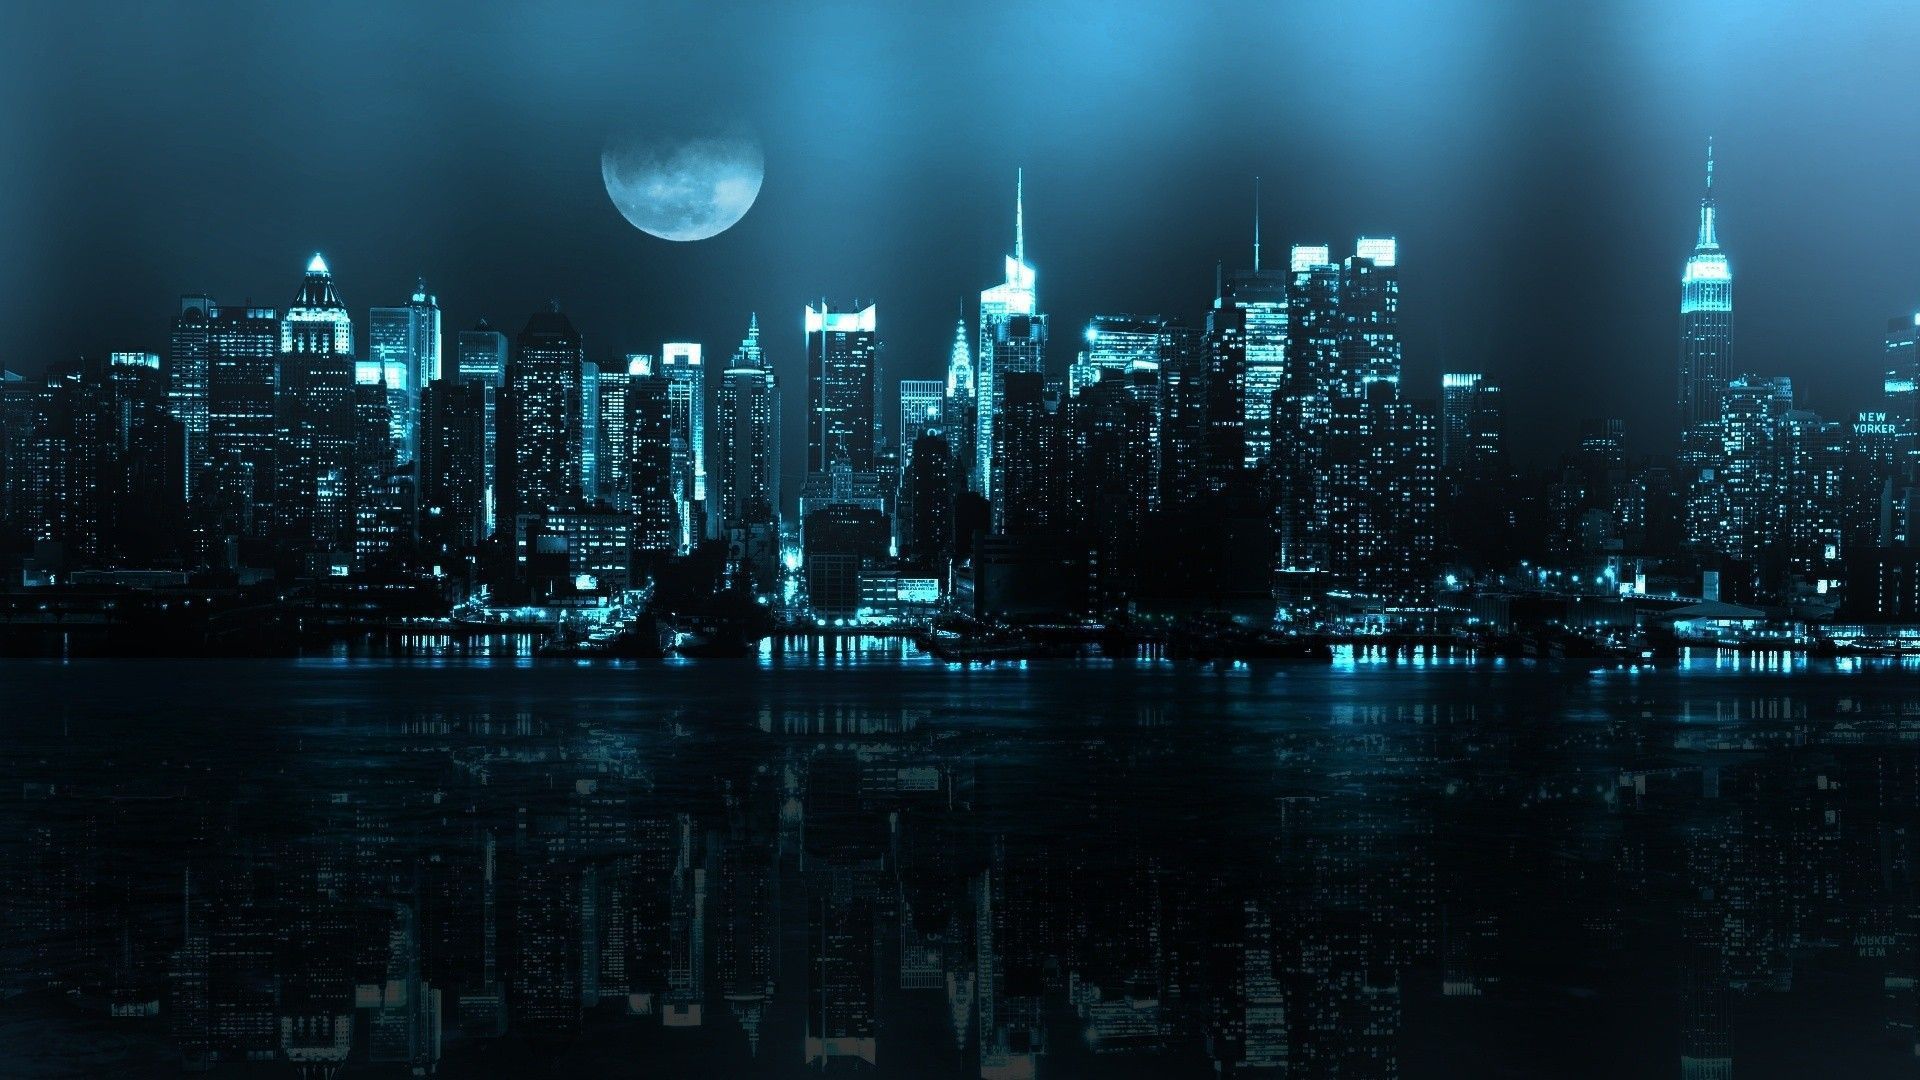 Moon over night city wallpapers and images - wallpapers, pictures